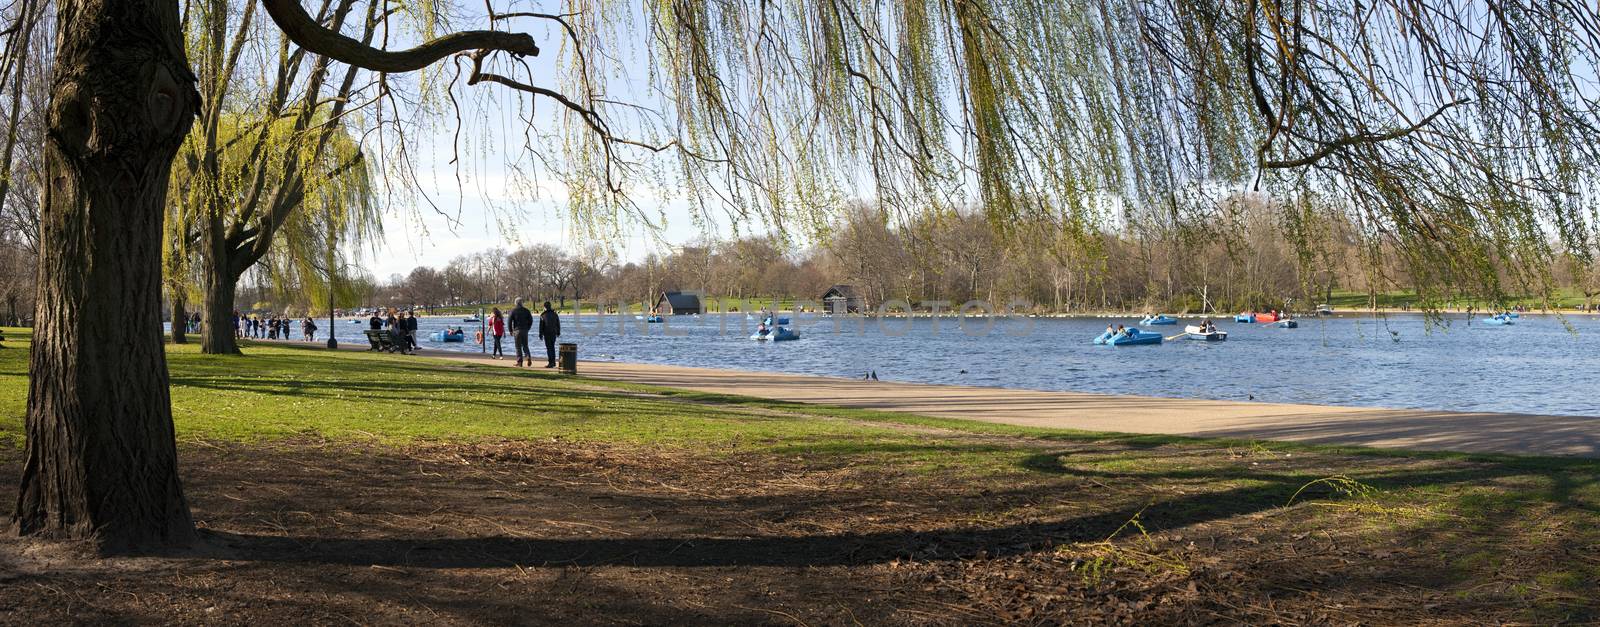 Panoramic view of the beautiful Serpentine in Hyde Park, London.